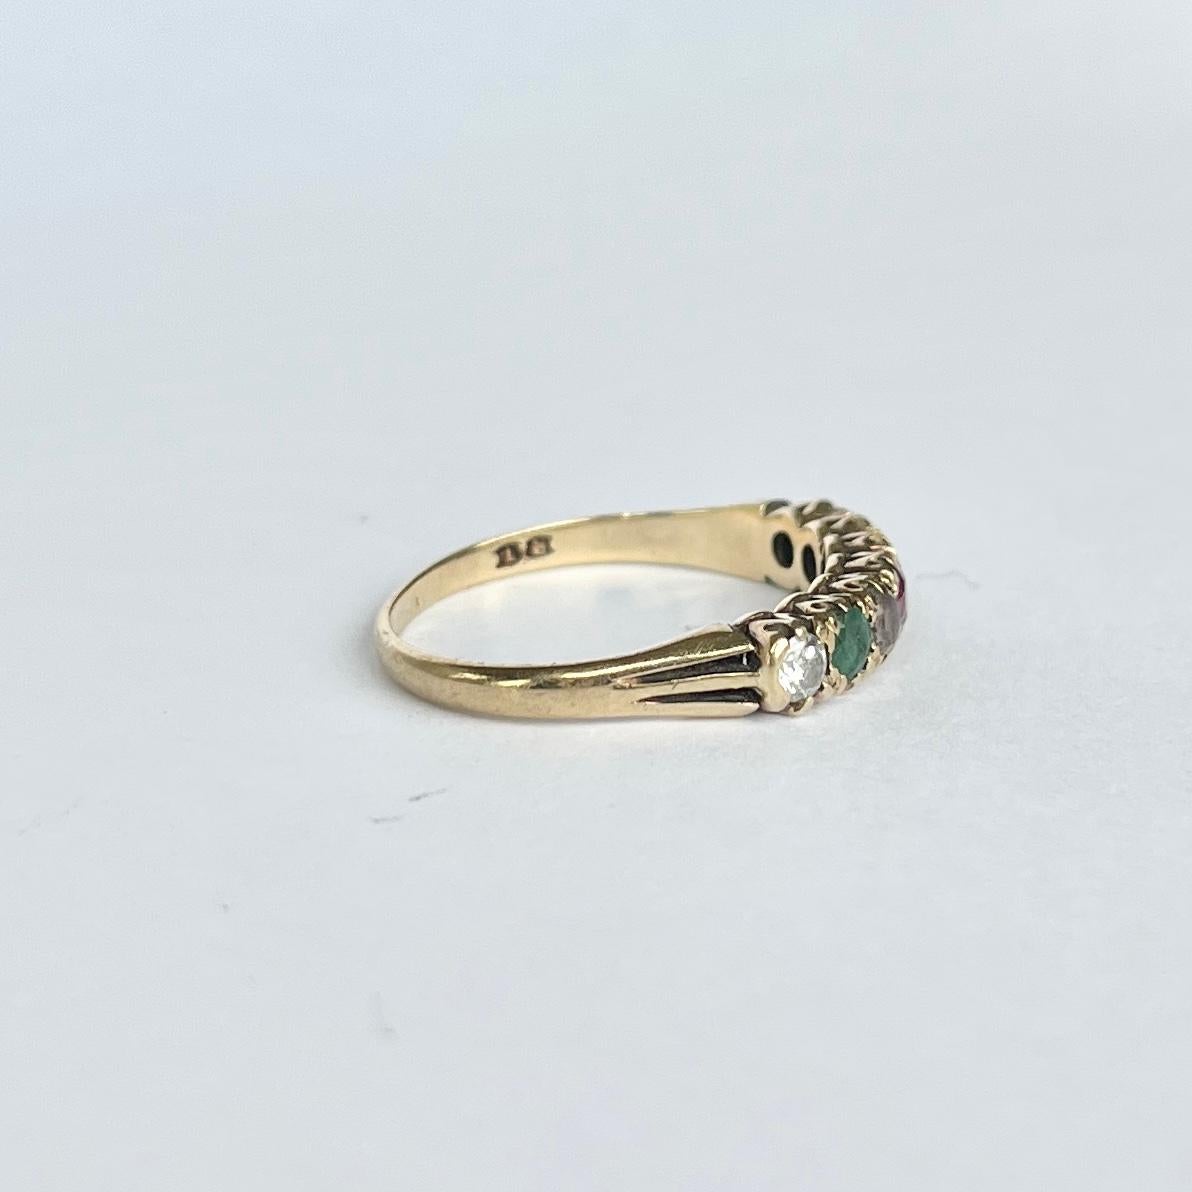 Vintage 9 Carat Gold Dearest Ring In Good Condition For Sale In Chipping Campden, GB